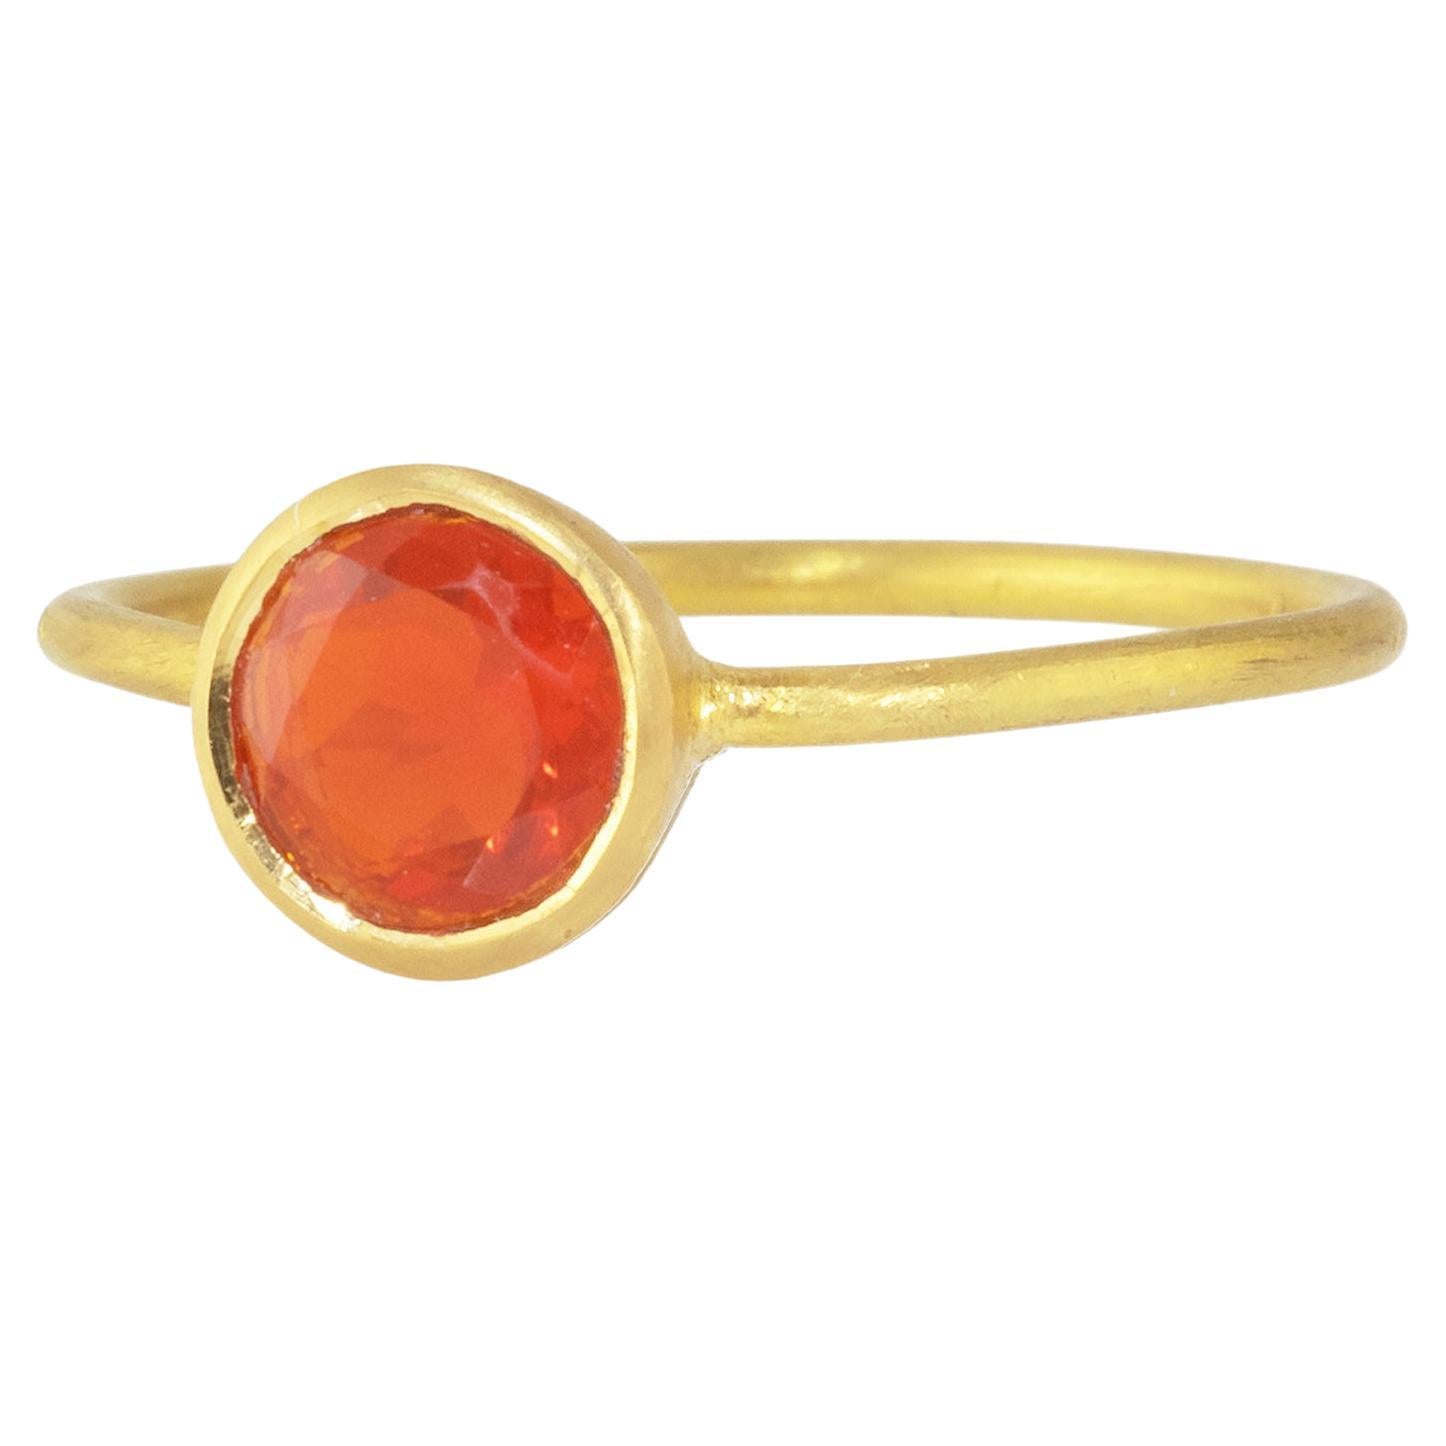 Artisan Ico & the Bird Fine Jewelry Fire Opal Stacking Ring 22k Gold For Sale